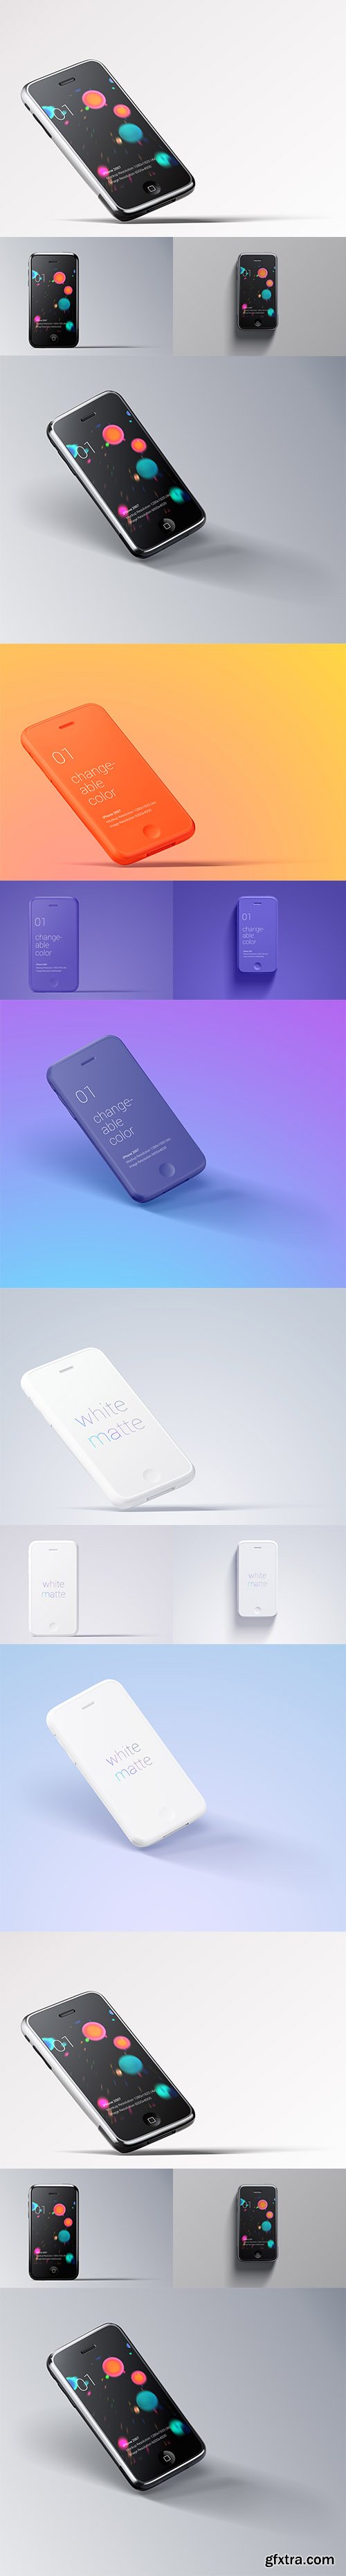 PSD Mock-Up - iPhone 1st Generation